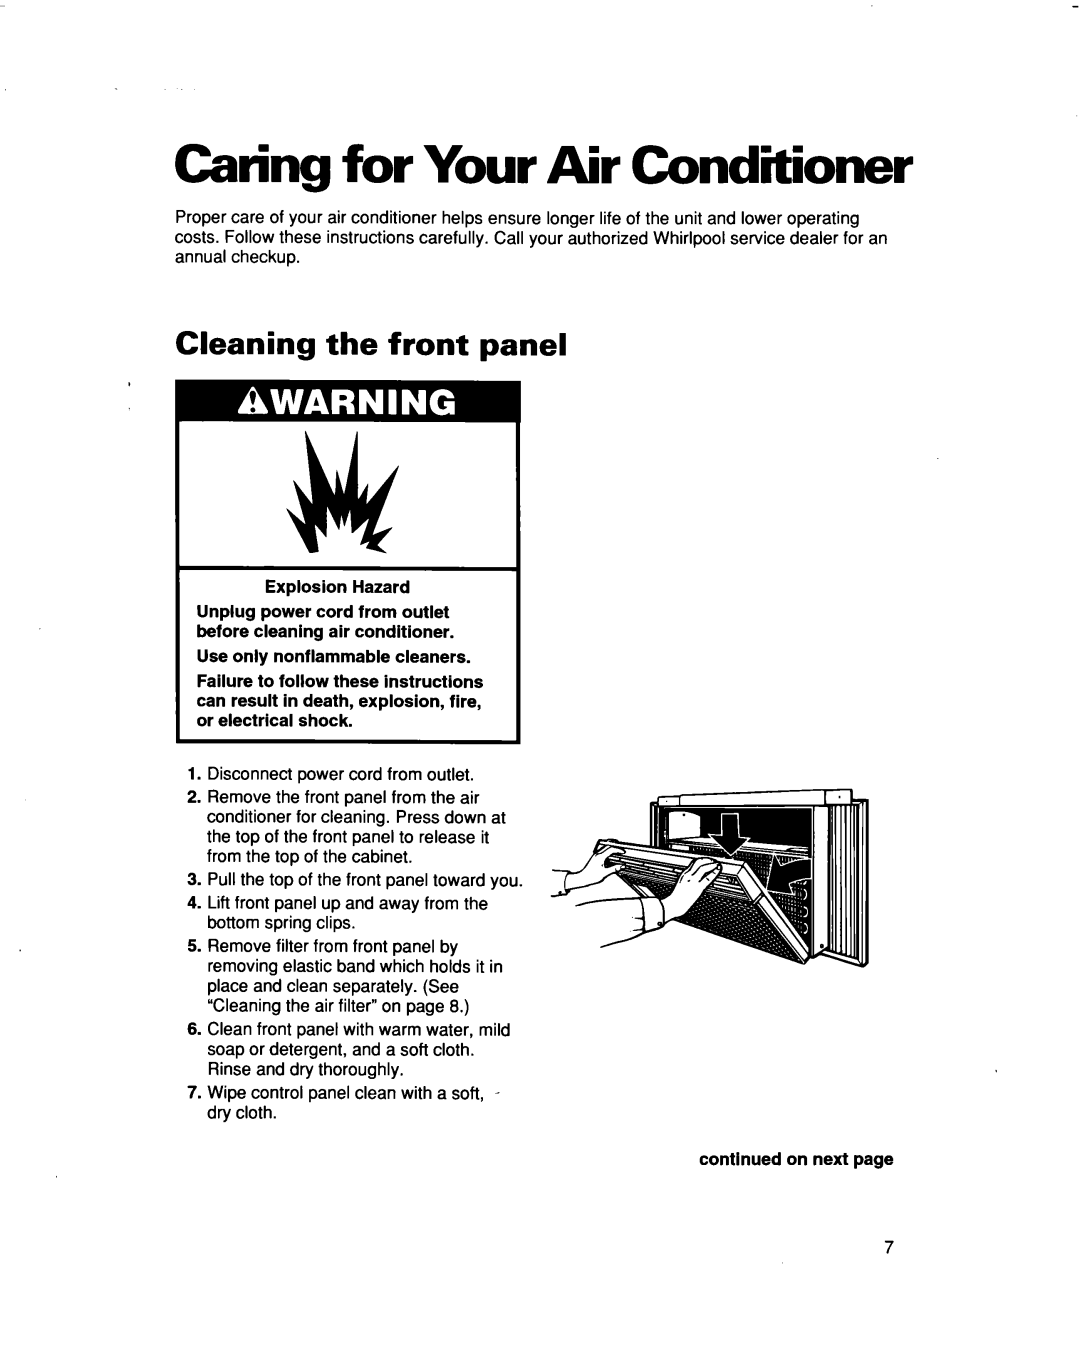 Whirlpool ACM102, ACM122 warranty Caring for Your Air Conditioner, Cleaning the front panel 